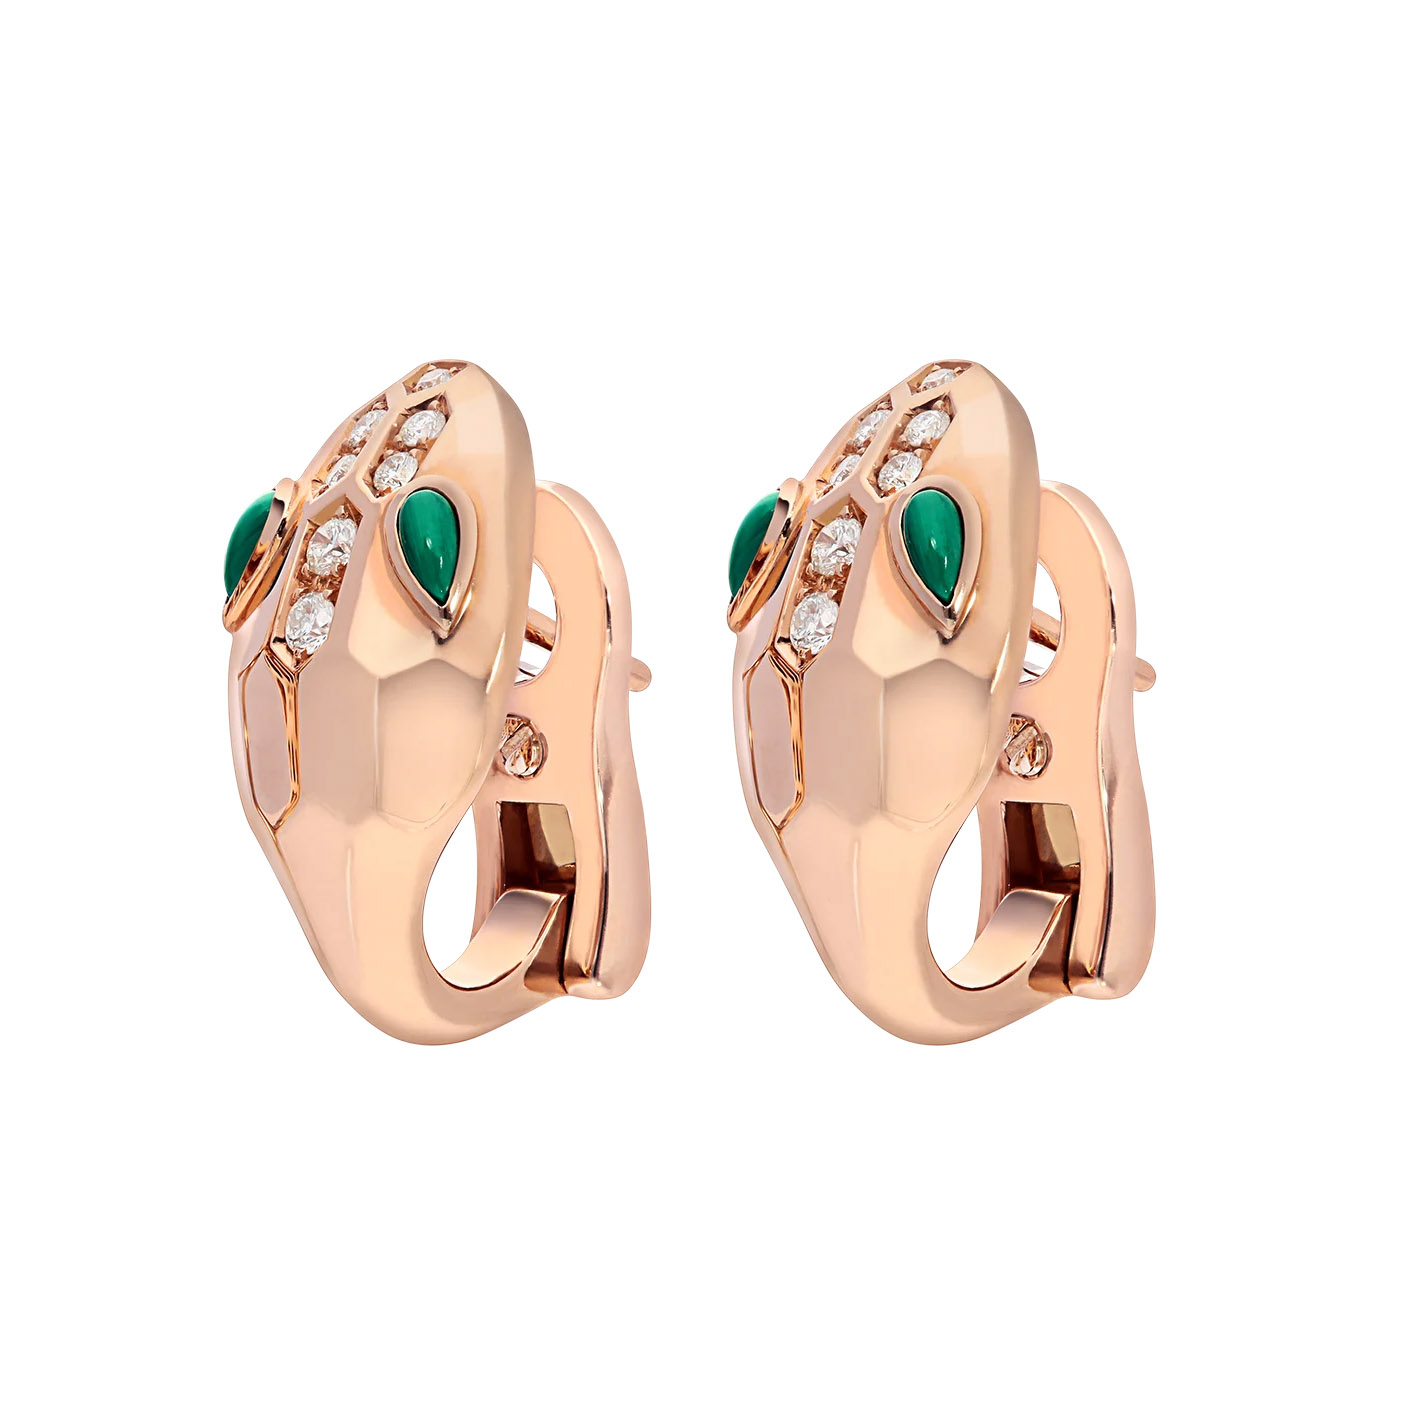 Wholesale Custom design earrings in 18k rose gold OEM/ODM Jewelry, set with malachite eyes and demi pavé diamonds OEM Jewelry Factory